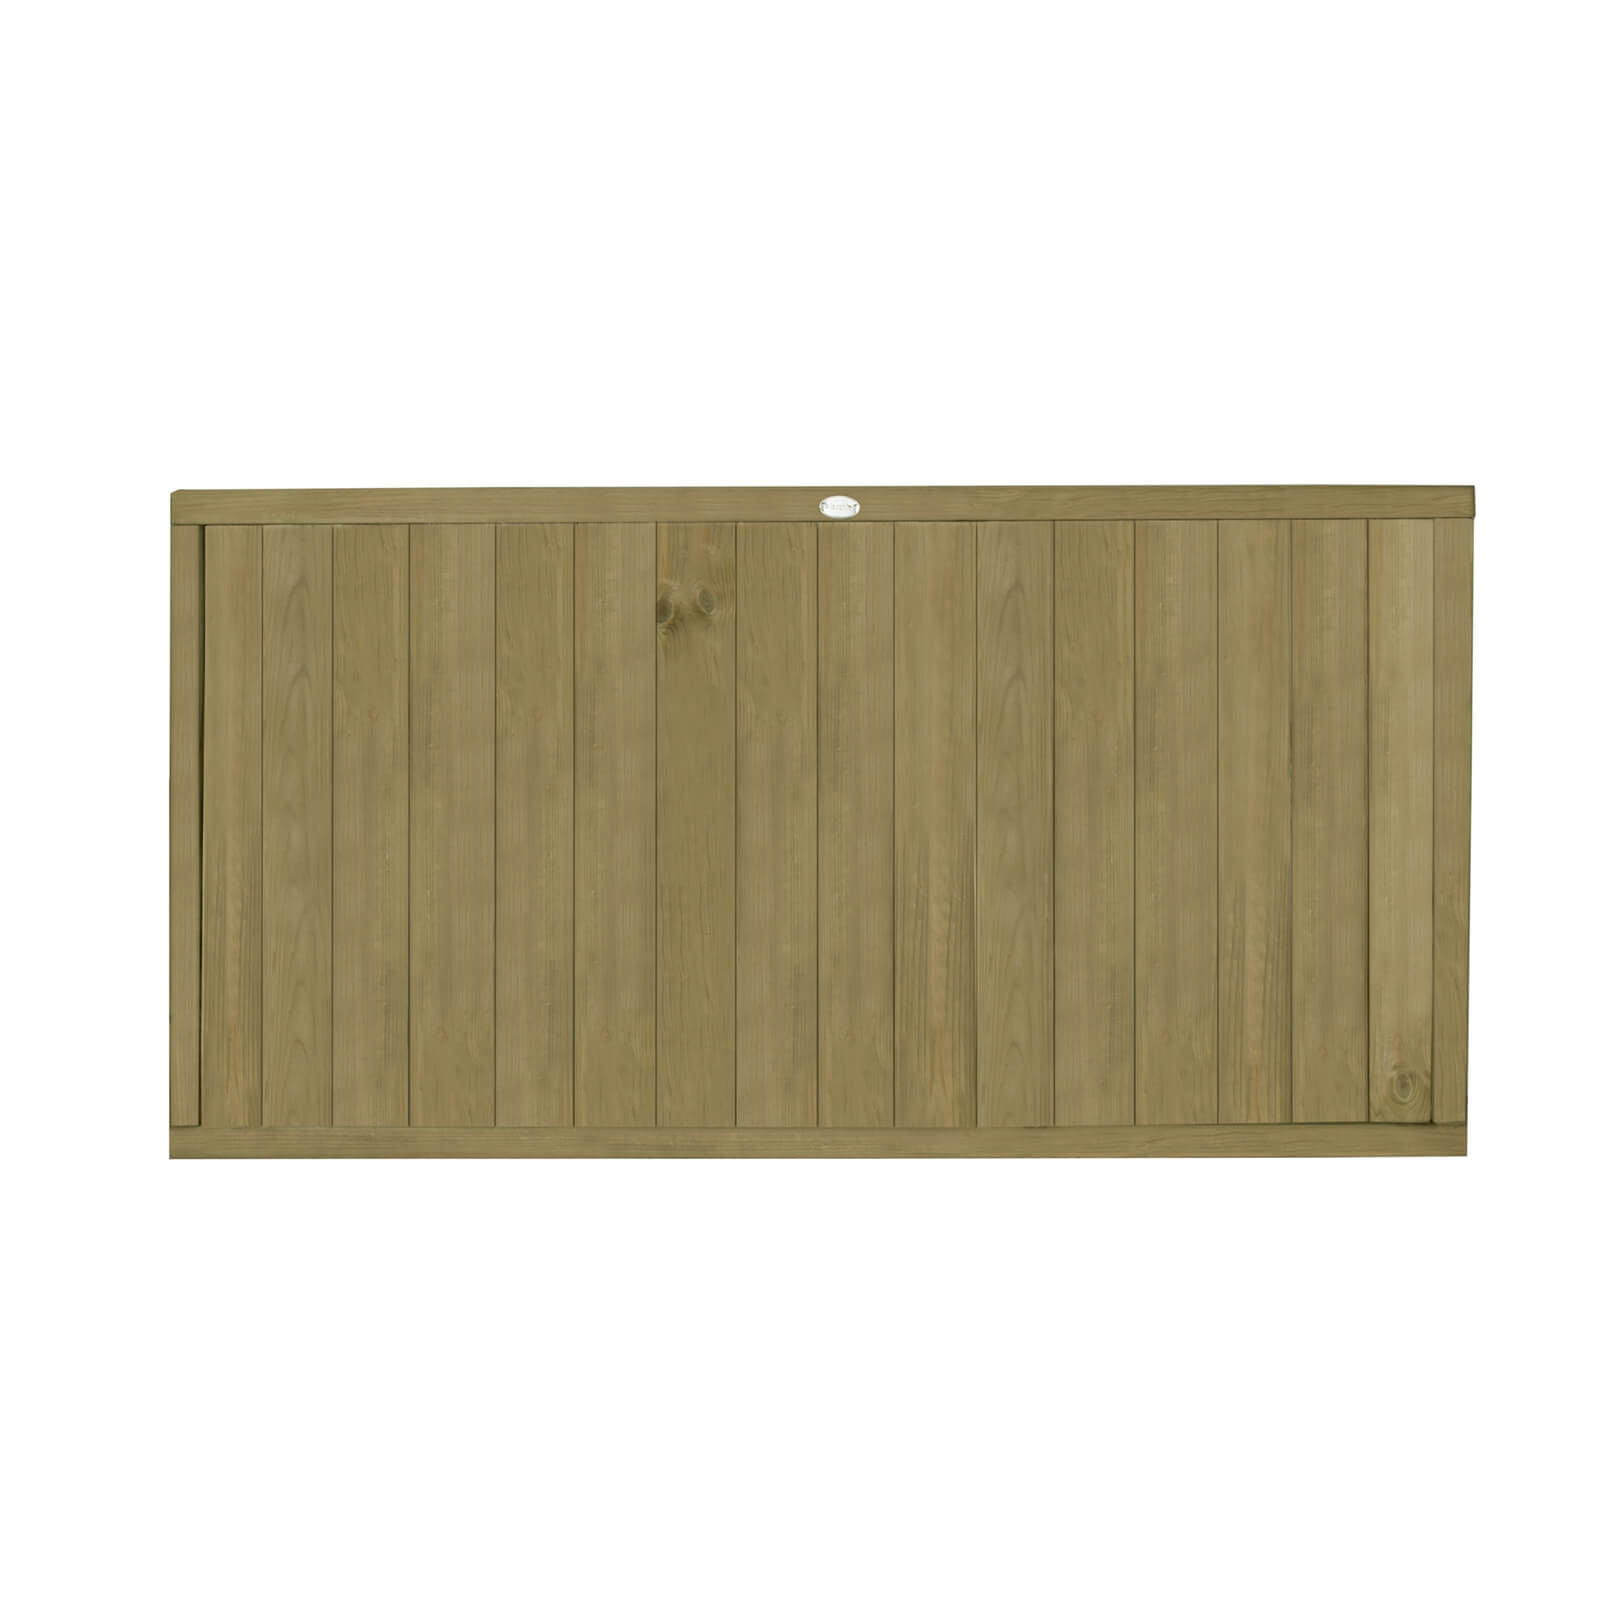 Forest Vertical Tongue & Groove Fence Panel - 3ft - Pack of 3